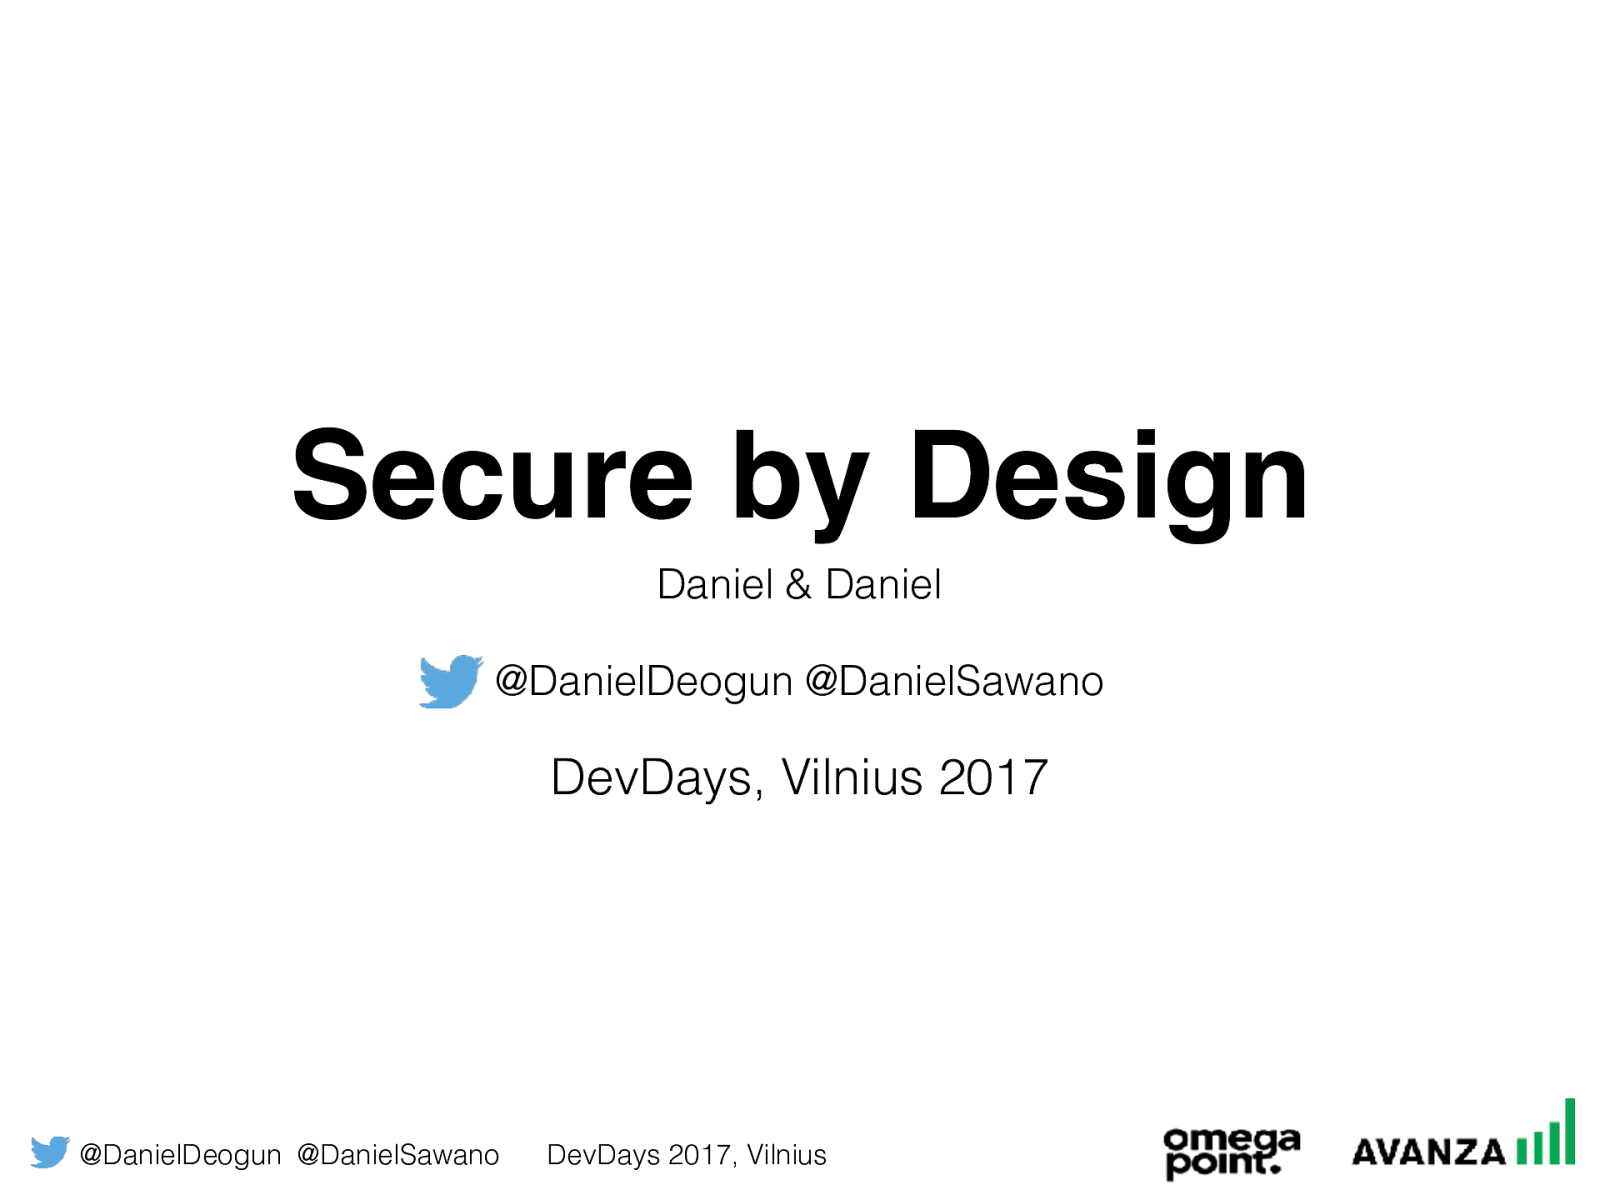 Secure by Design